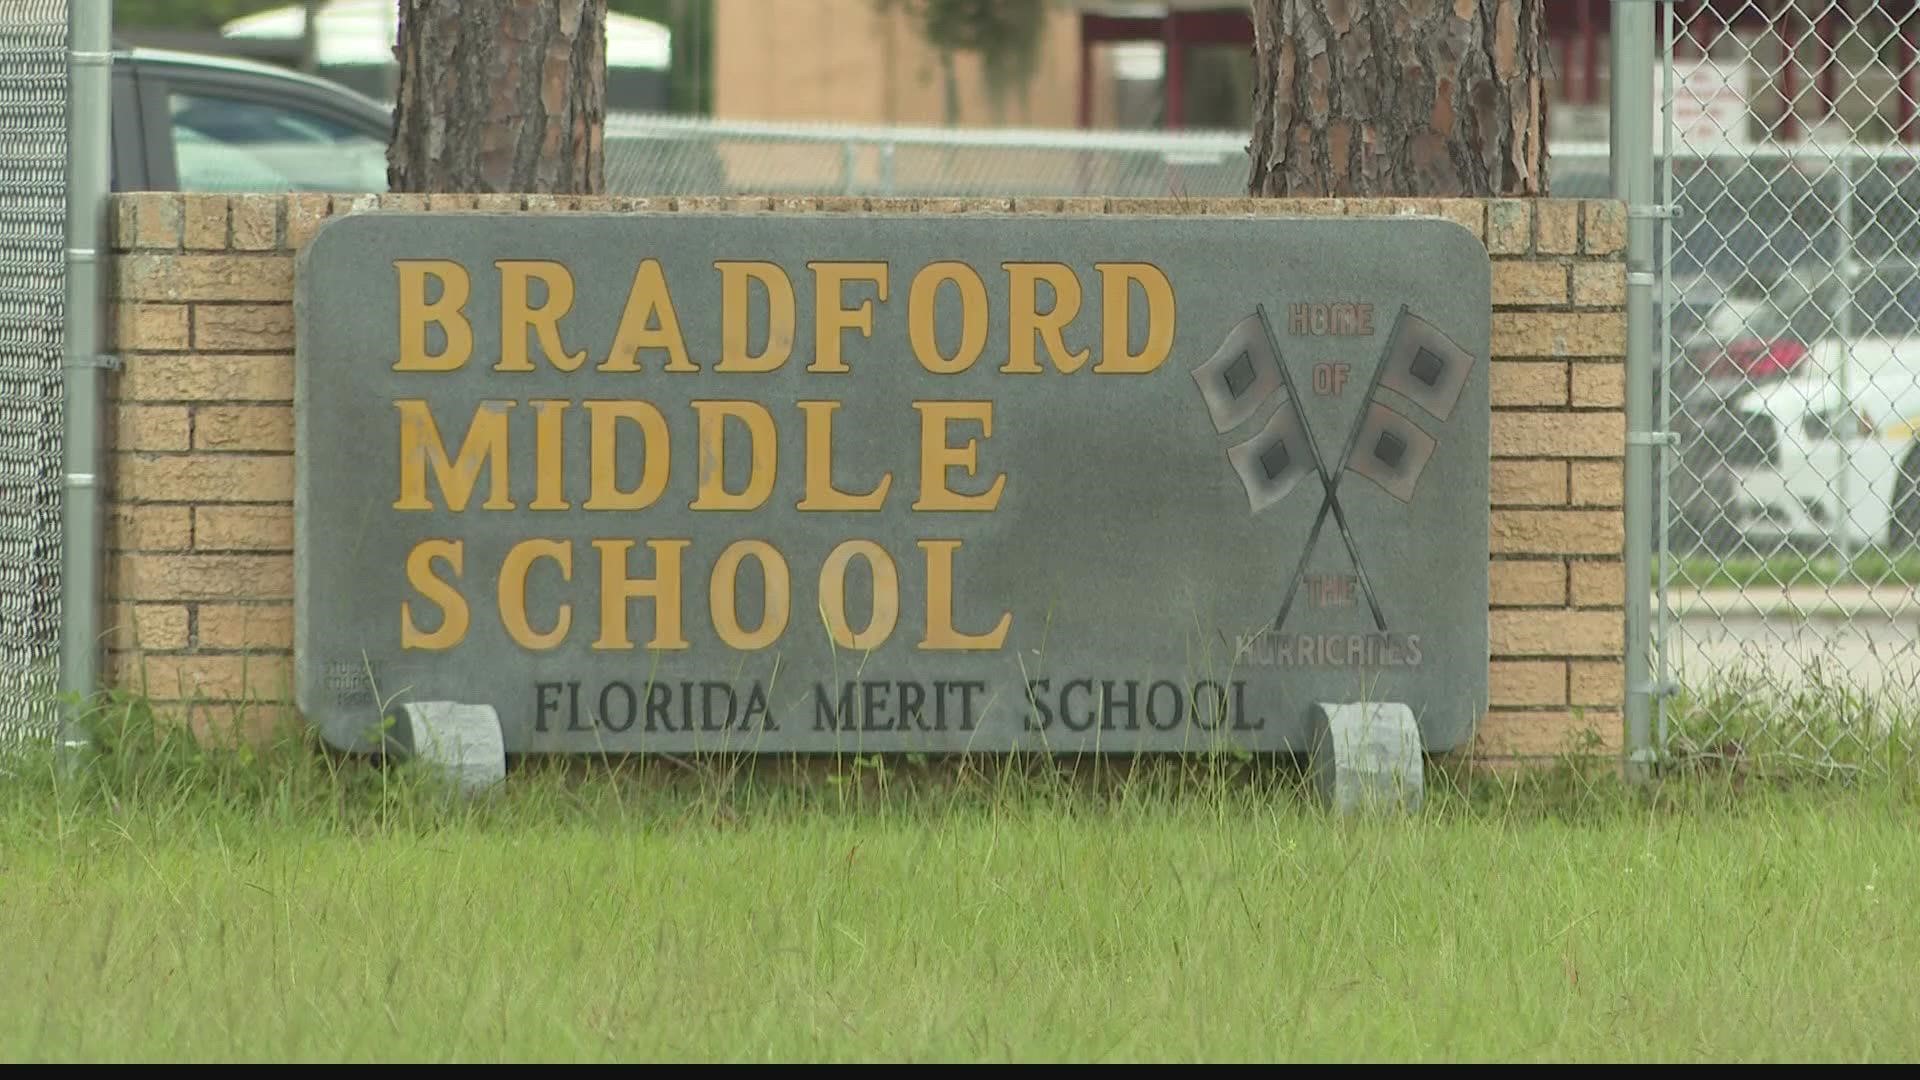 Parents were alerted they could come pick up their children if they wished to. The school is looking into the cause.